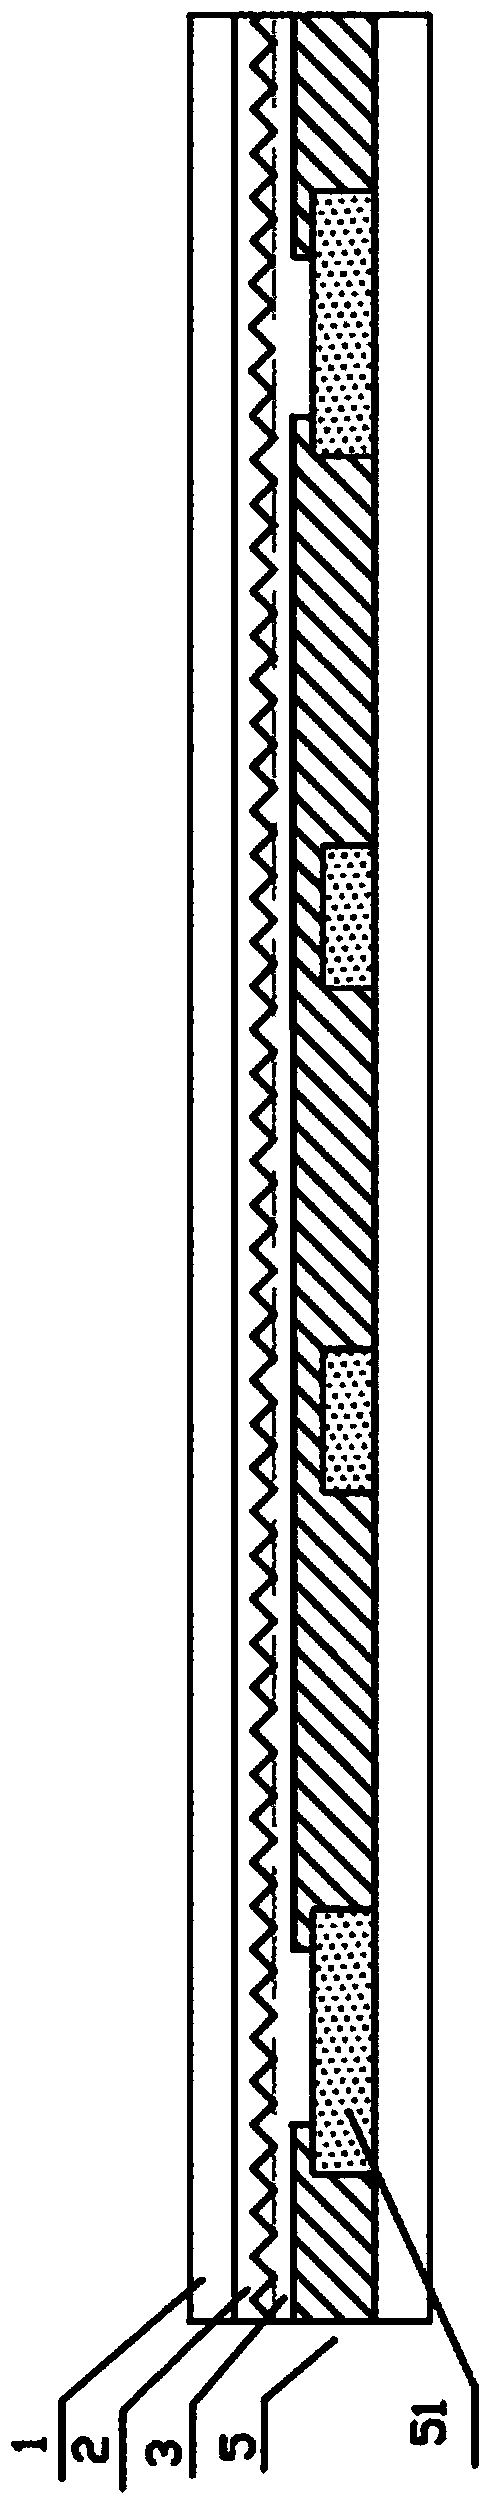 Ultrahigh-frequency electromagnetic wave shielding film without chemical electroplating process and conductive particles, and manufacturing method of circuit board comprising film